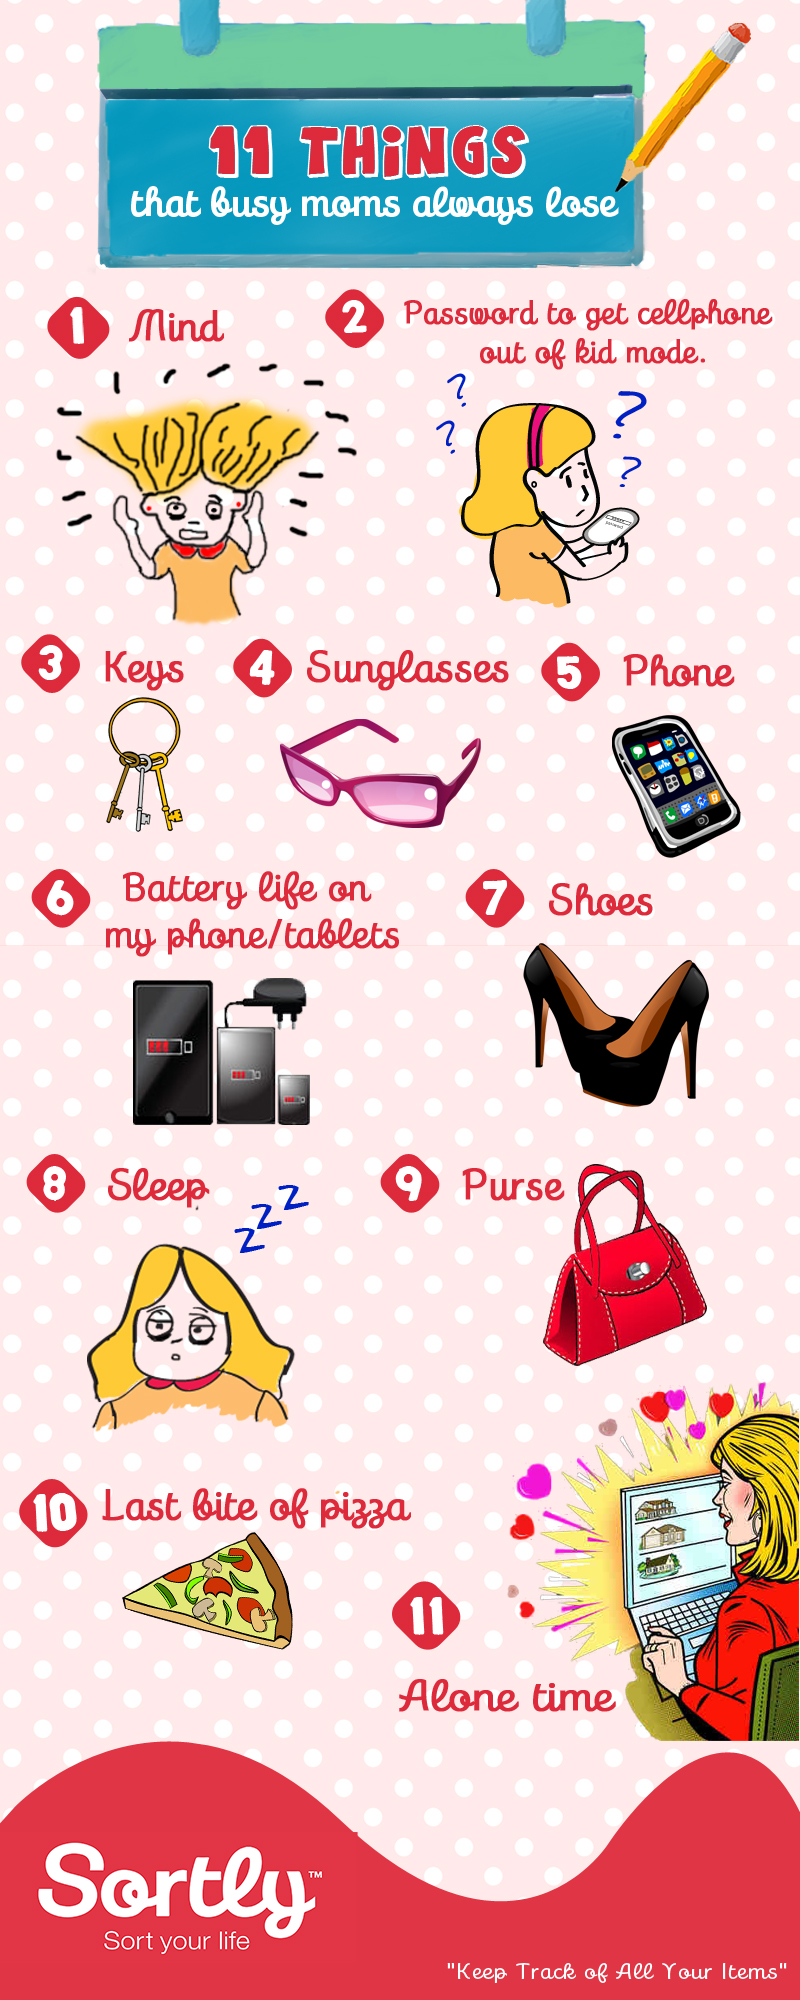 11 Things Busy Moms Always Lose Infographic